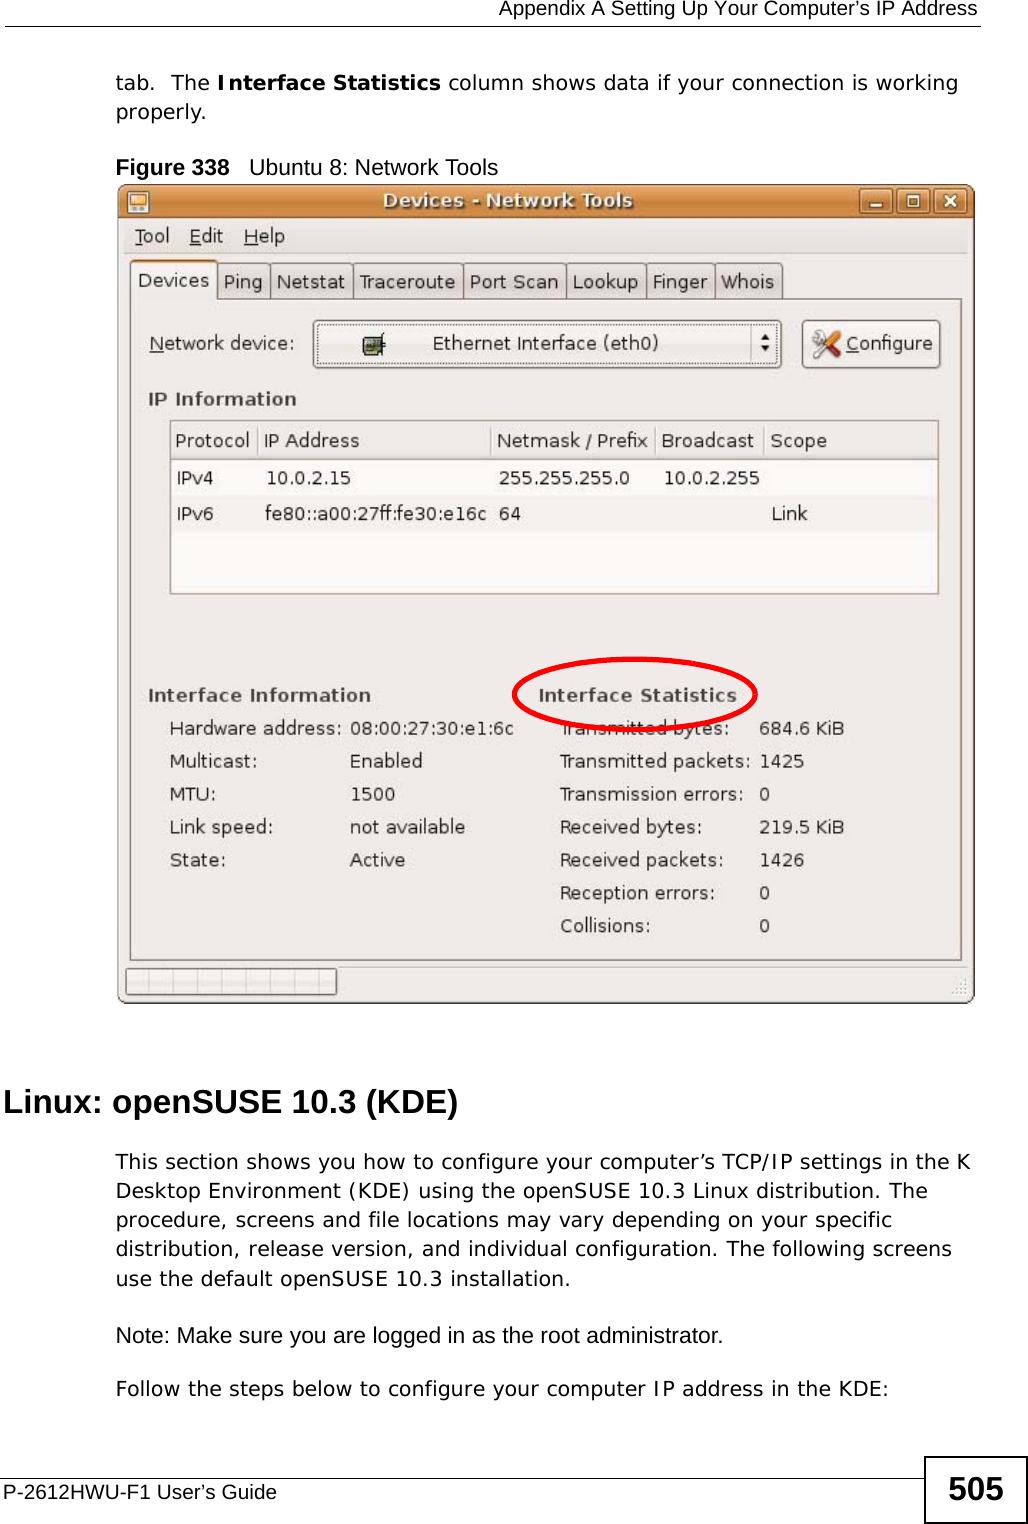  Appendix A Setting Up Your Computer’s IP AddressP-2612HWU-F1 User’s Guide 505tab.  The Interface Statistics column shows data if your connection is working properly.Figure 338   Ubuntu 8: Network ToolsLinux: openSUSE 10.3 (KDE)This section shows you how to configure your computer’s TCP/IP settings in the K Desktop Environment (KDE) using the openSUSE 10.3 Linux distribution. The procedure, screens and file locations may vary depending on your specific distribution, release version, and individual configuration. The following screens use the default openSUSE 10.3 installation.Note: Make sure you are logged in as the root administrator. Follow the steps below to configure your computer IP address in the KDE: